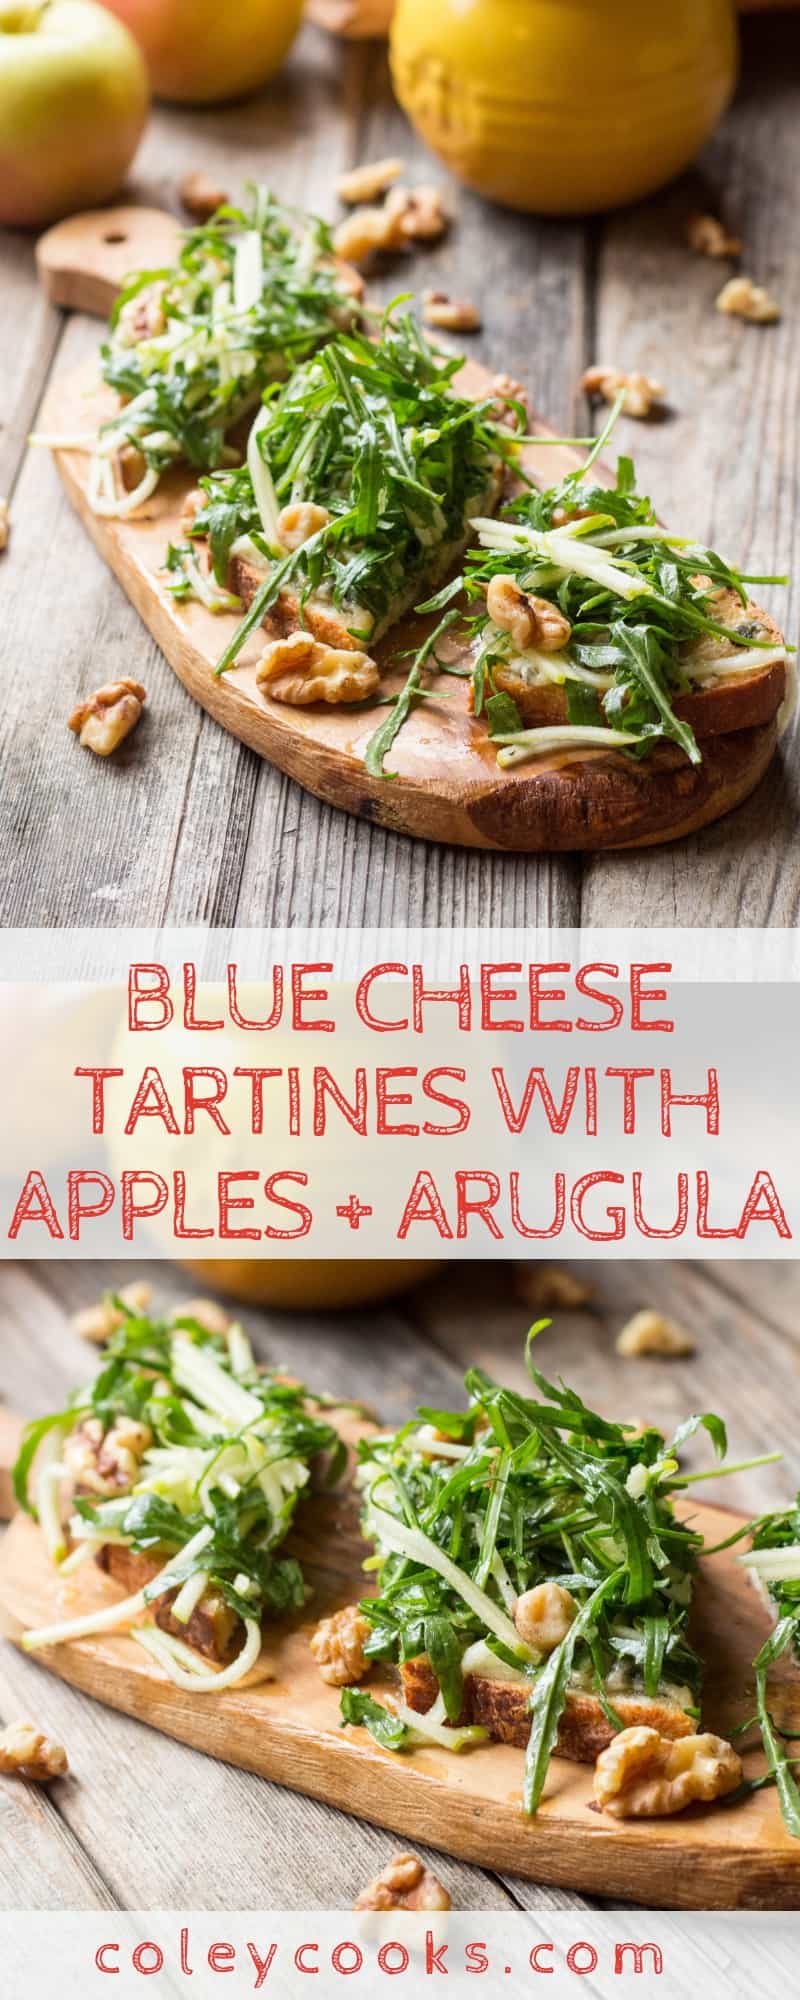 BLUE CHEESE TARTINES with APPLES + ARUGULA | Simple and delicious open face sandwich recipe! Tangy blue cheese, crisp apples, peppery arugula, crunchy walnuts. #easy #tartine #bluecheese #apple #cheese #recipe #brunch #lunch #sandwich #arugula | ColeyCooks.com